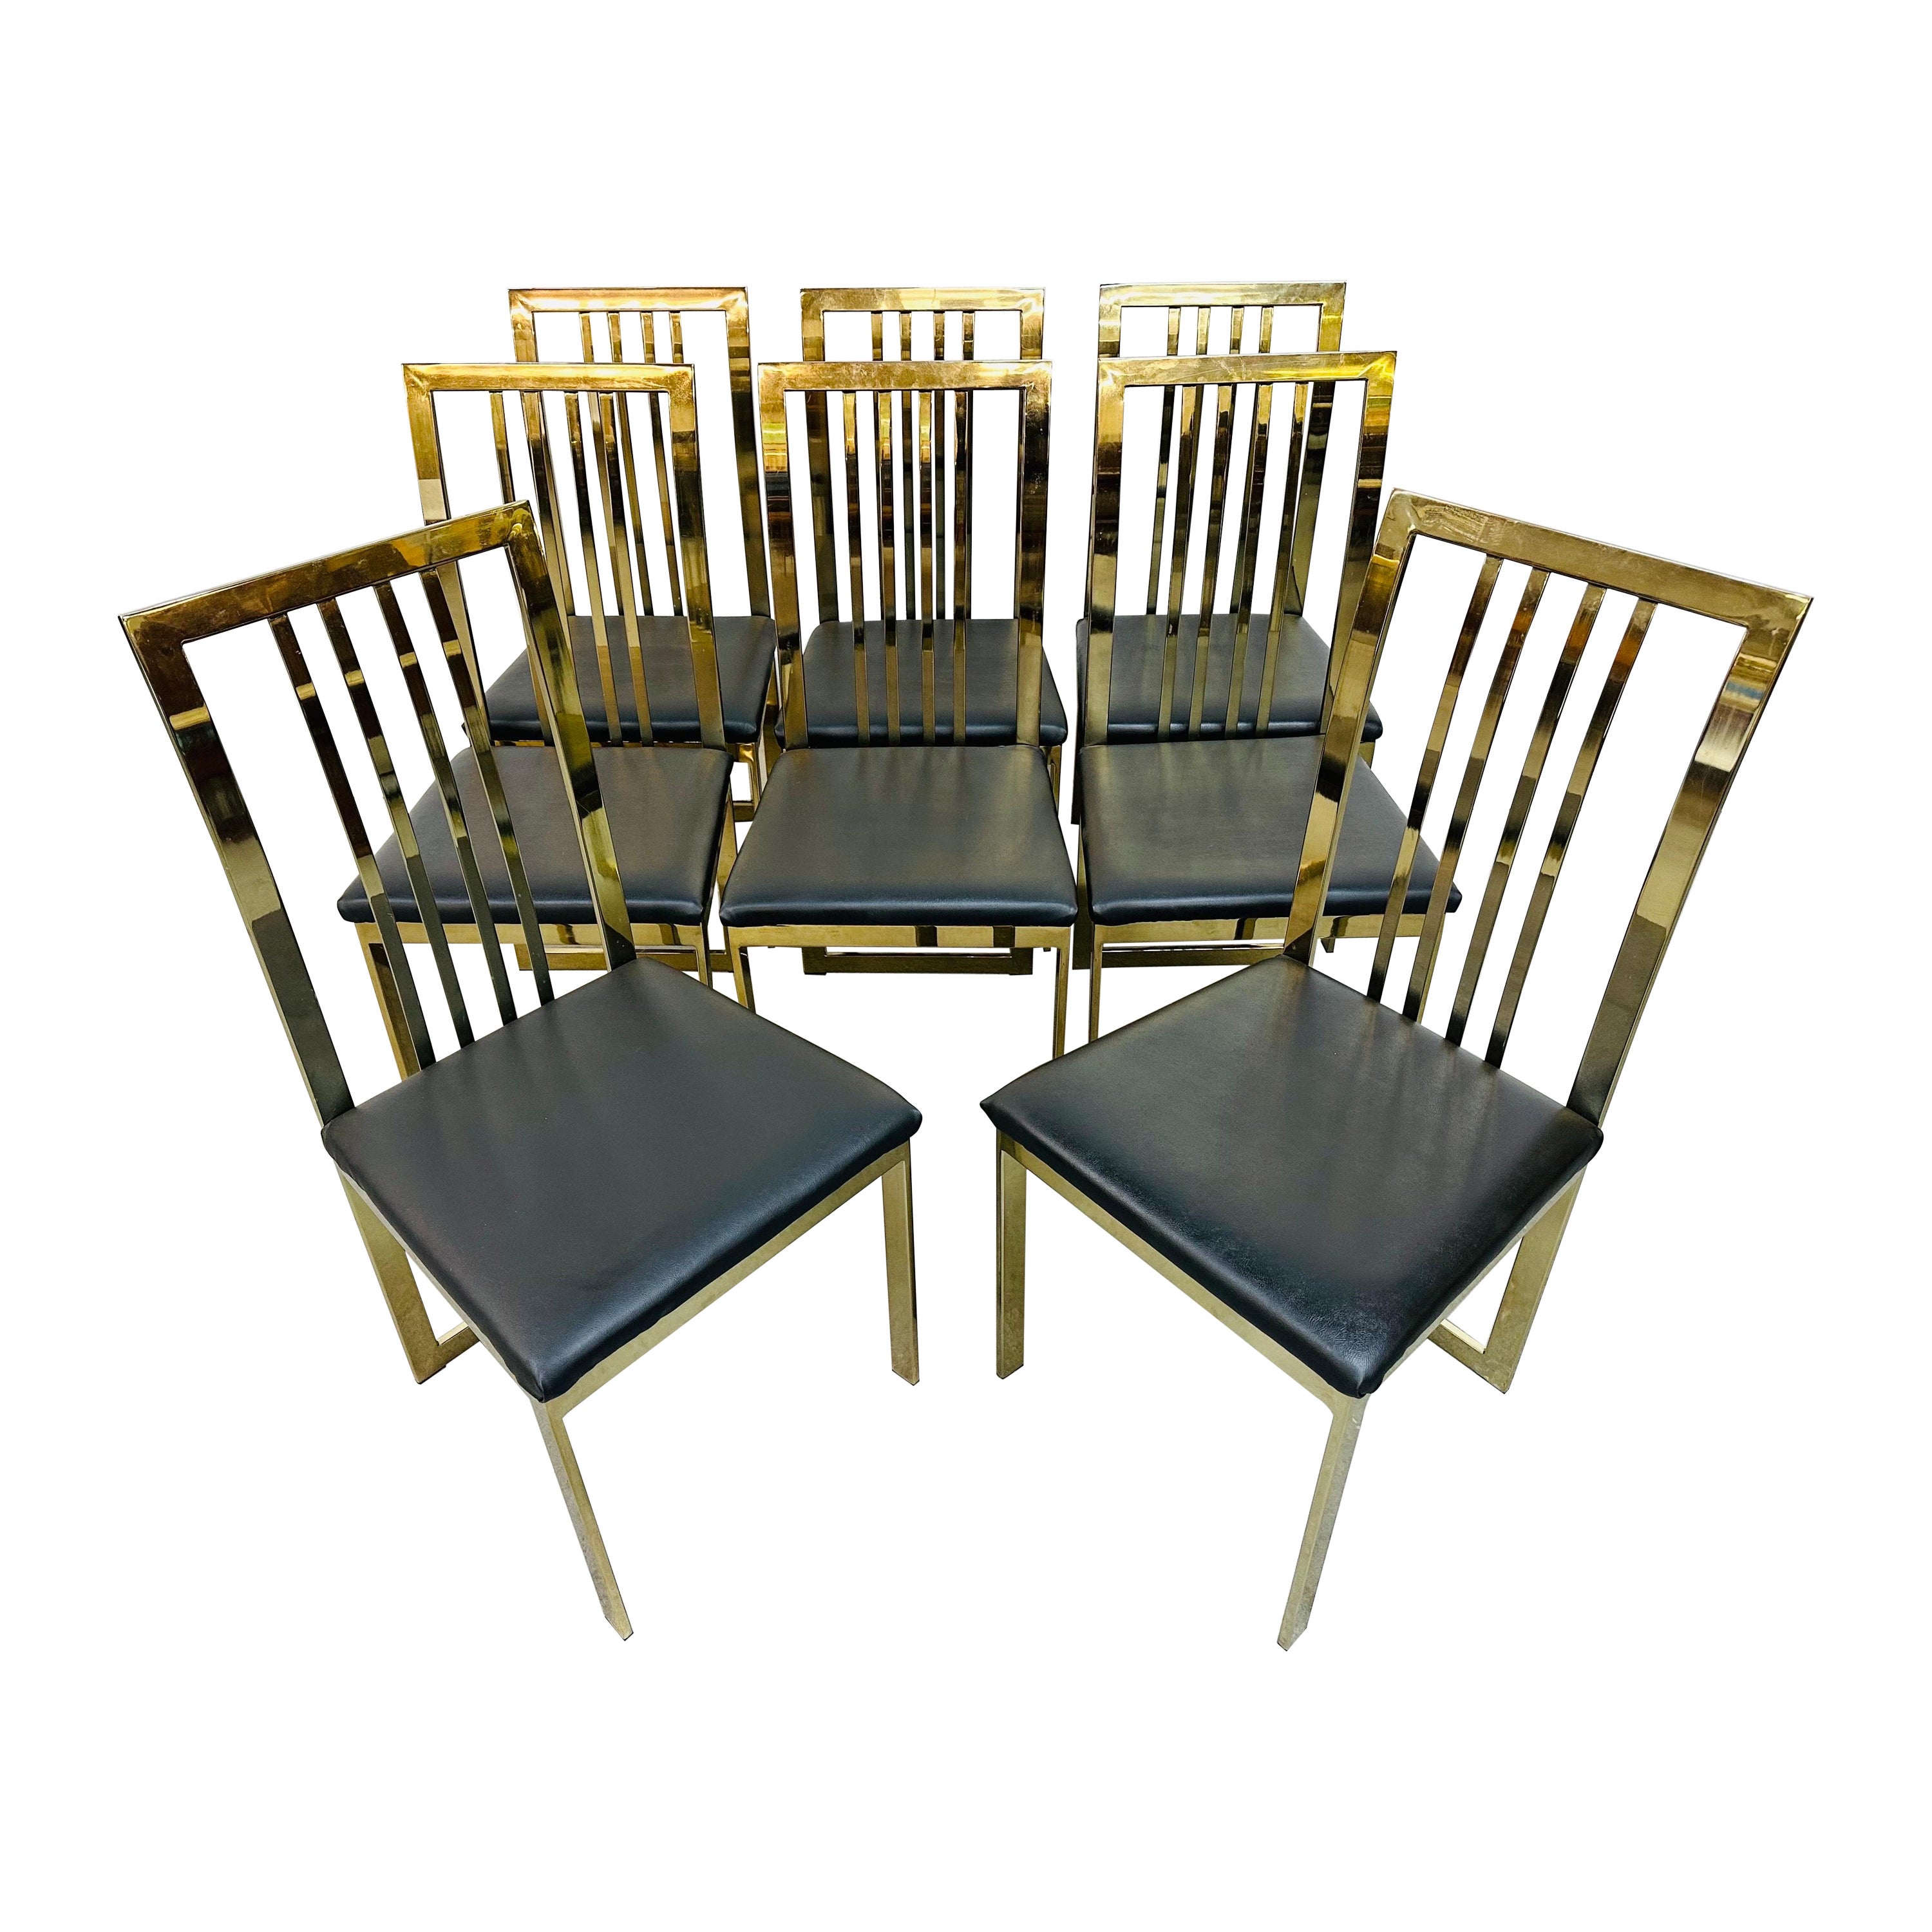 Vintage Milo Baughman Style Flat Bar Brass Dining Chairs - Set of 8